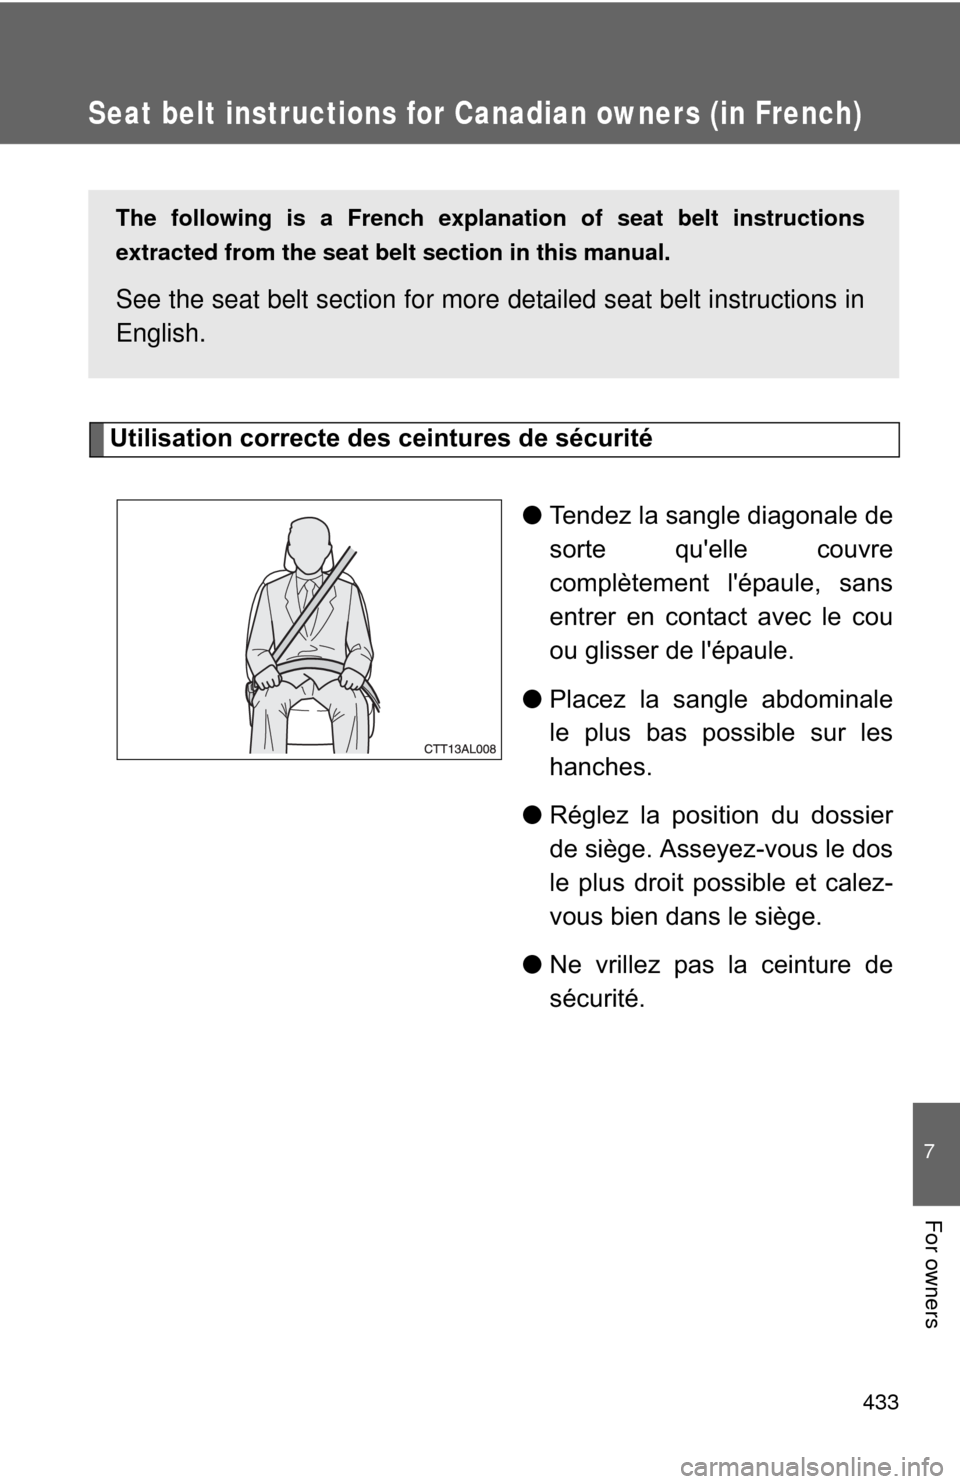 TOYOTA MATRIX 2010 E140 / 2.G Repair Manual 433
7
For owners
Seat belt instructions for Canadian owners (in French)
The following is a French explanation of seat belt instructions
extracted from the seat belt section in this manual.
See the sea